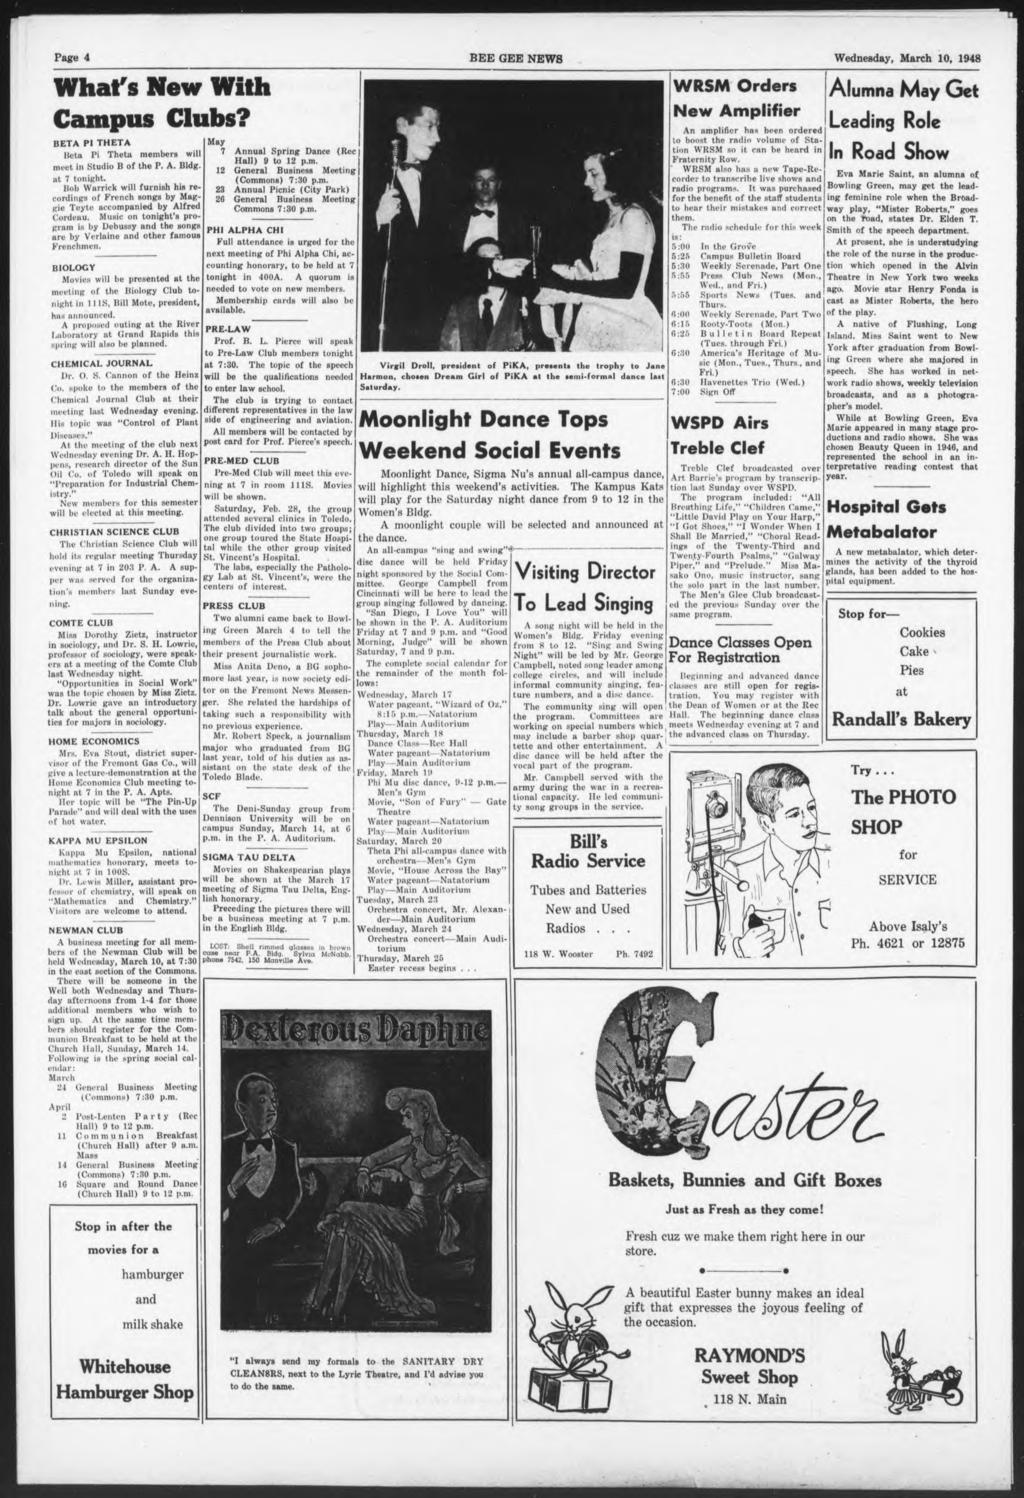 Page 4 BEE GEE NEWS Wednesday, March 10, 1948 What's New With Campus Clubs? BETA PI THETA licta I'i Thcta members will meat in Studio B of the P. A. Bldg. at 7 tonight.